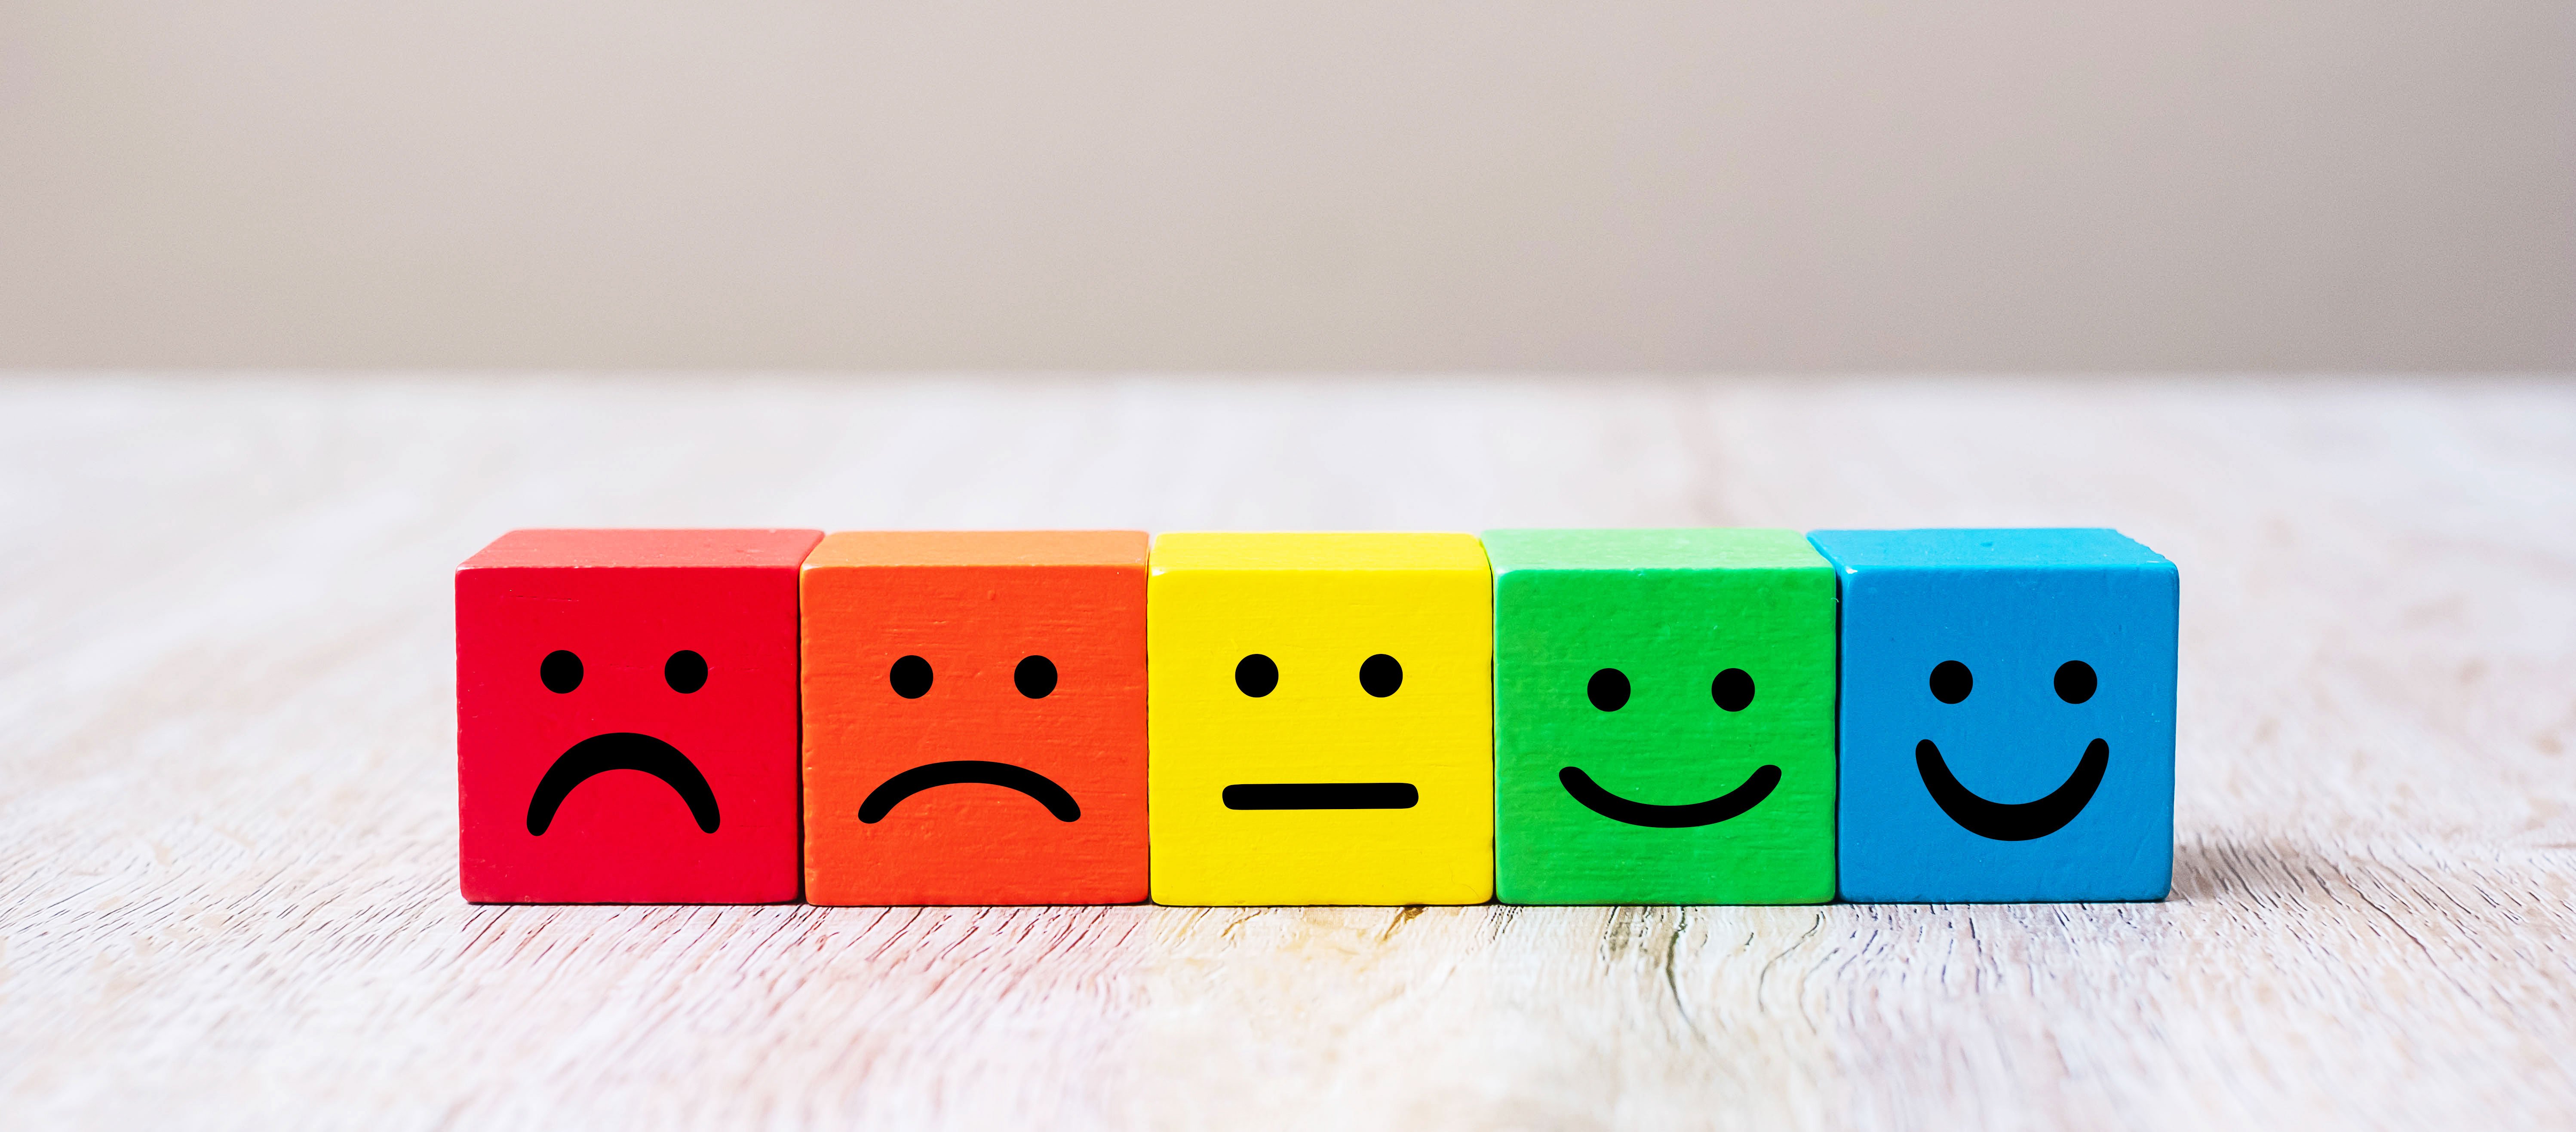 survey-emotion-face-symbol-wooden-cube-blocks-service-rating-ranking-customer-review-satisfaction-feedback-concept